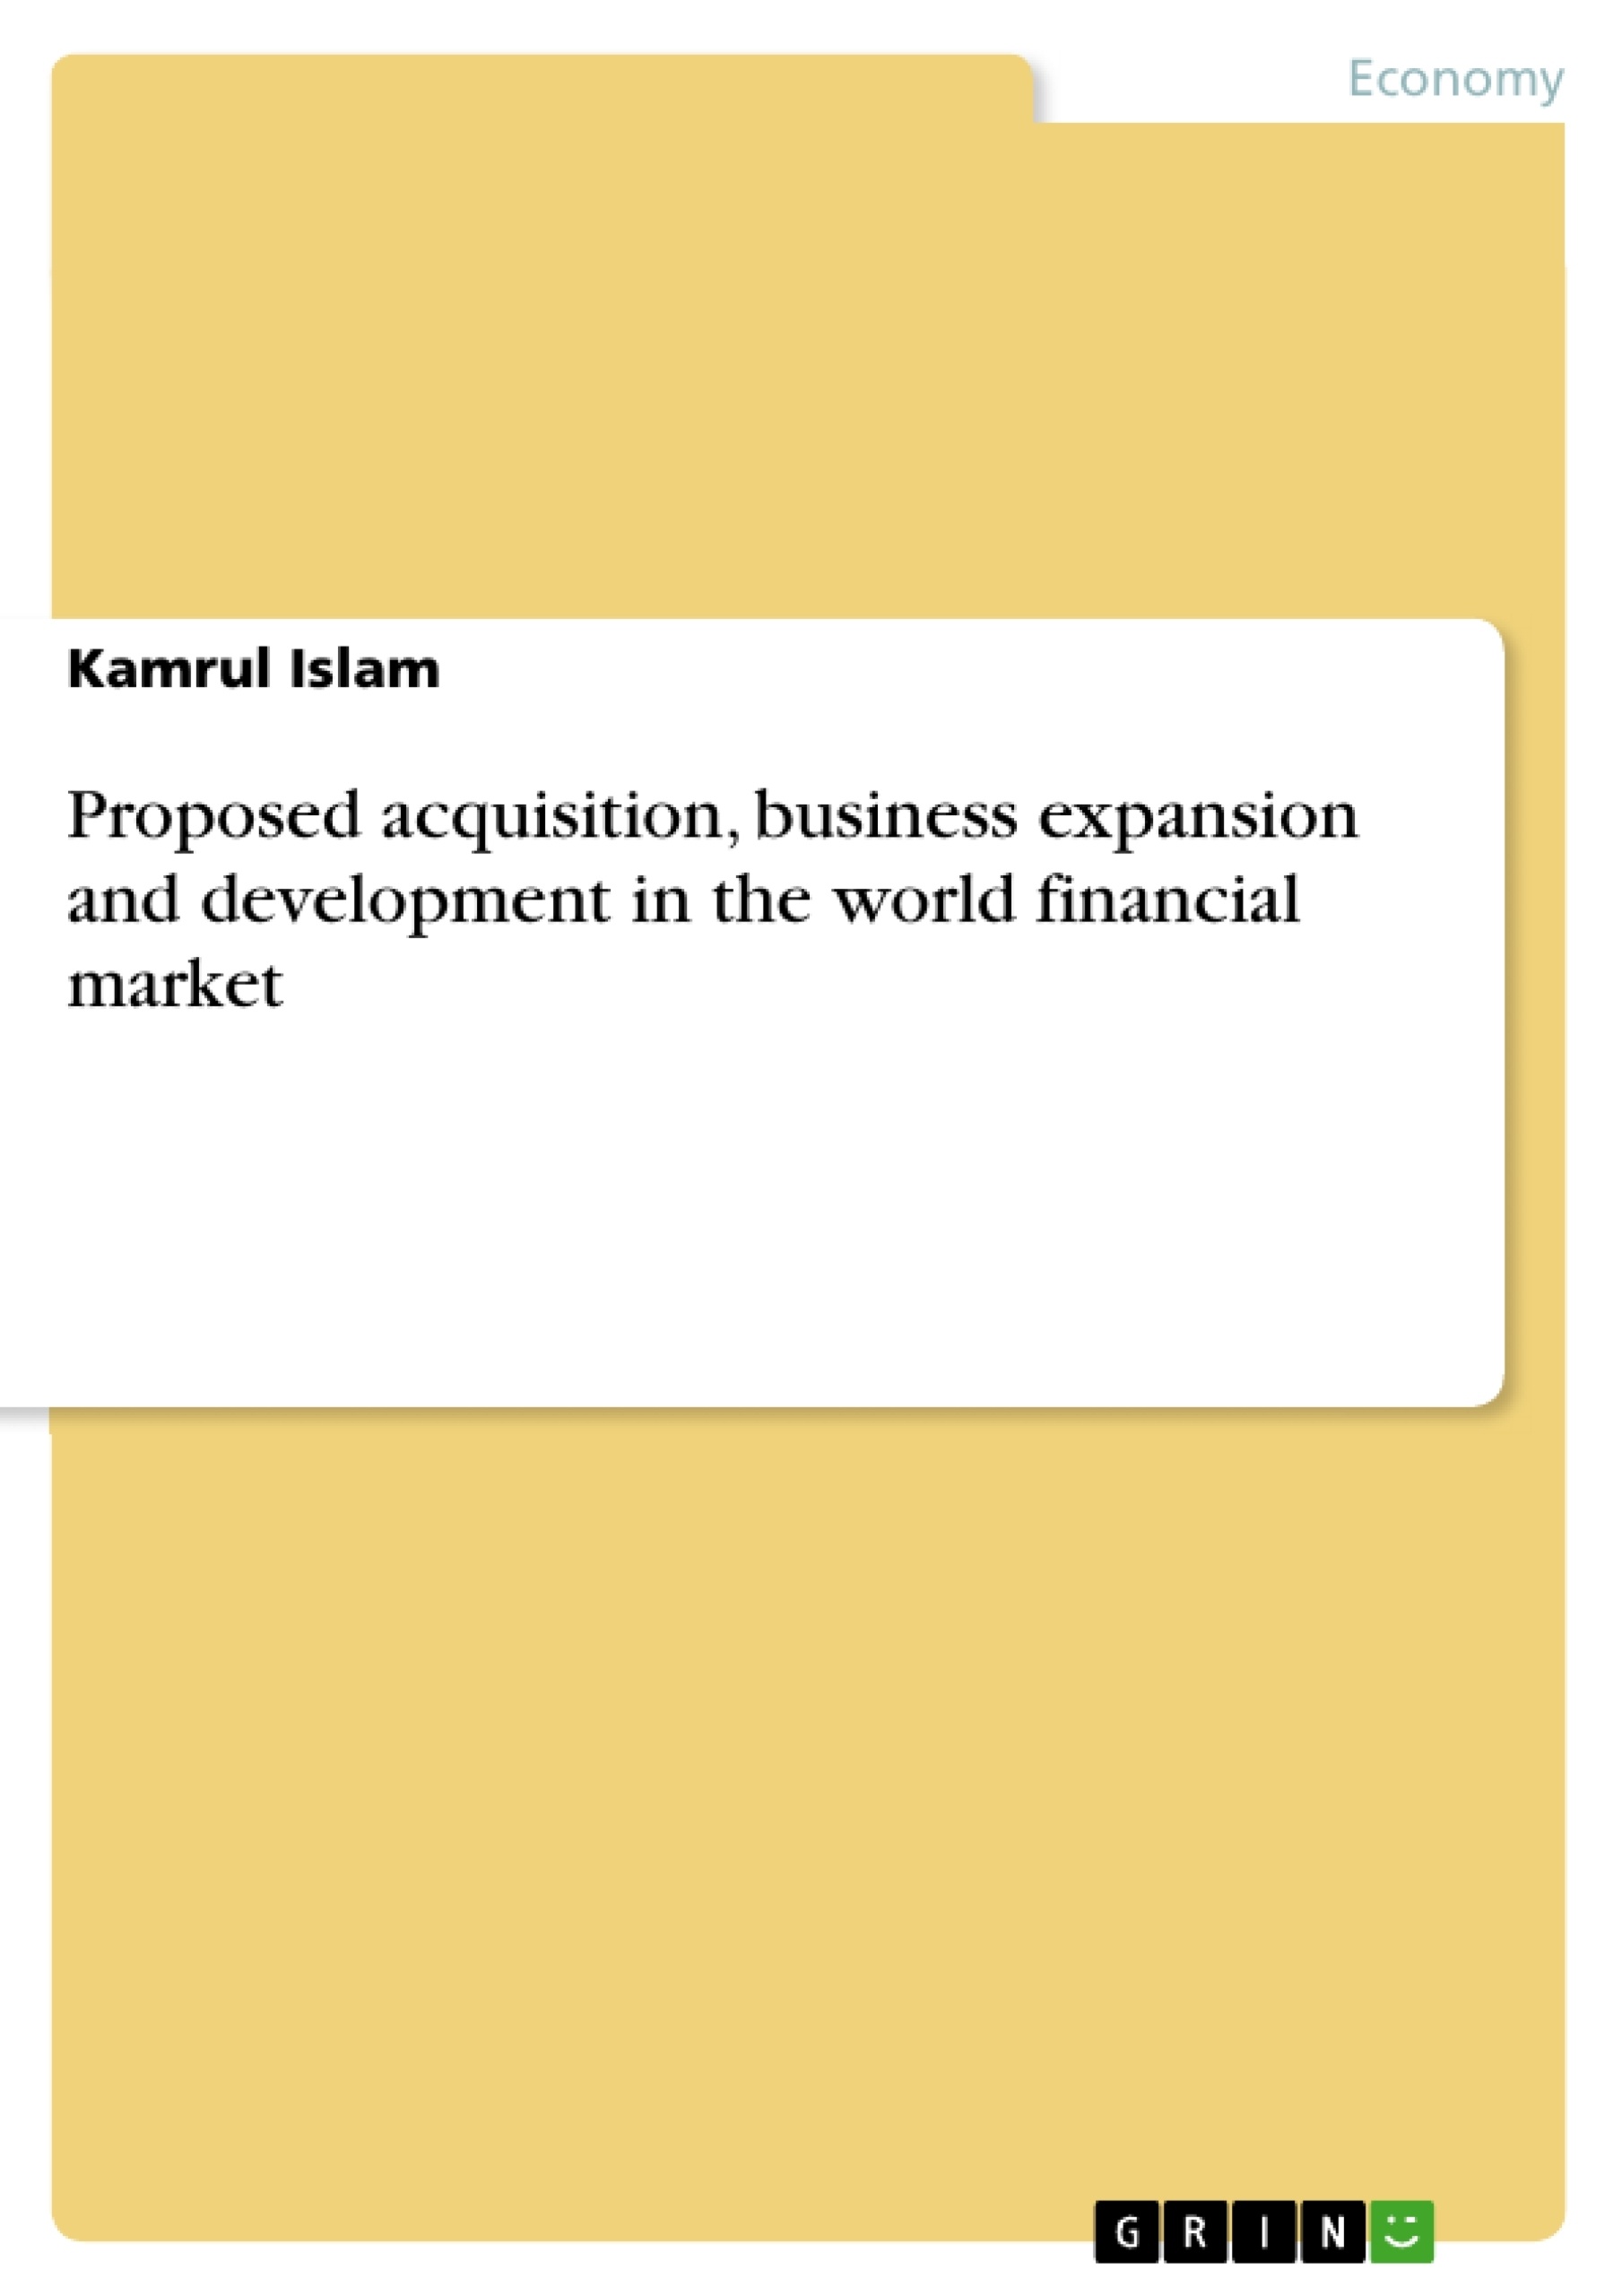 Titel: Proposed acquisition, business expansion and development in the world financial market